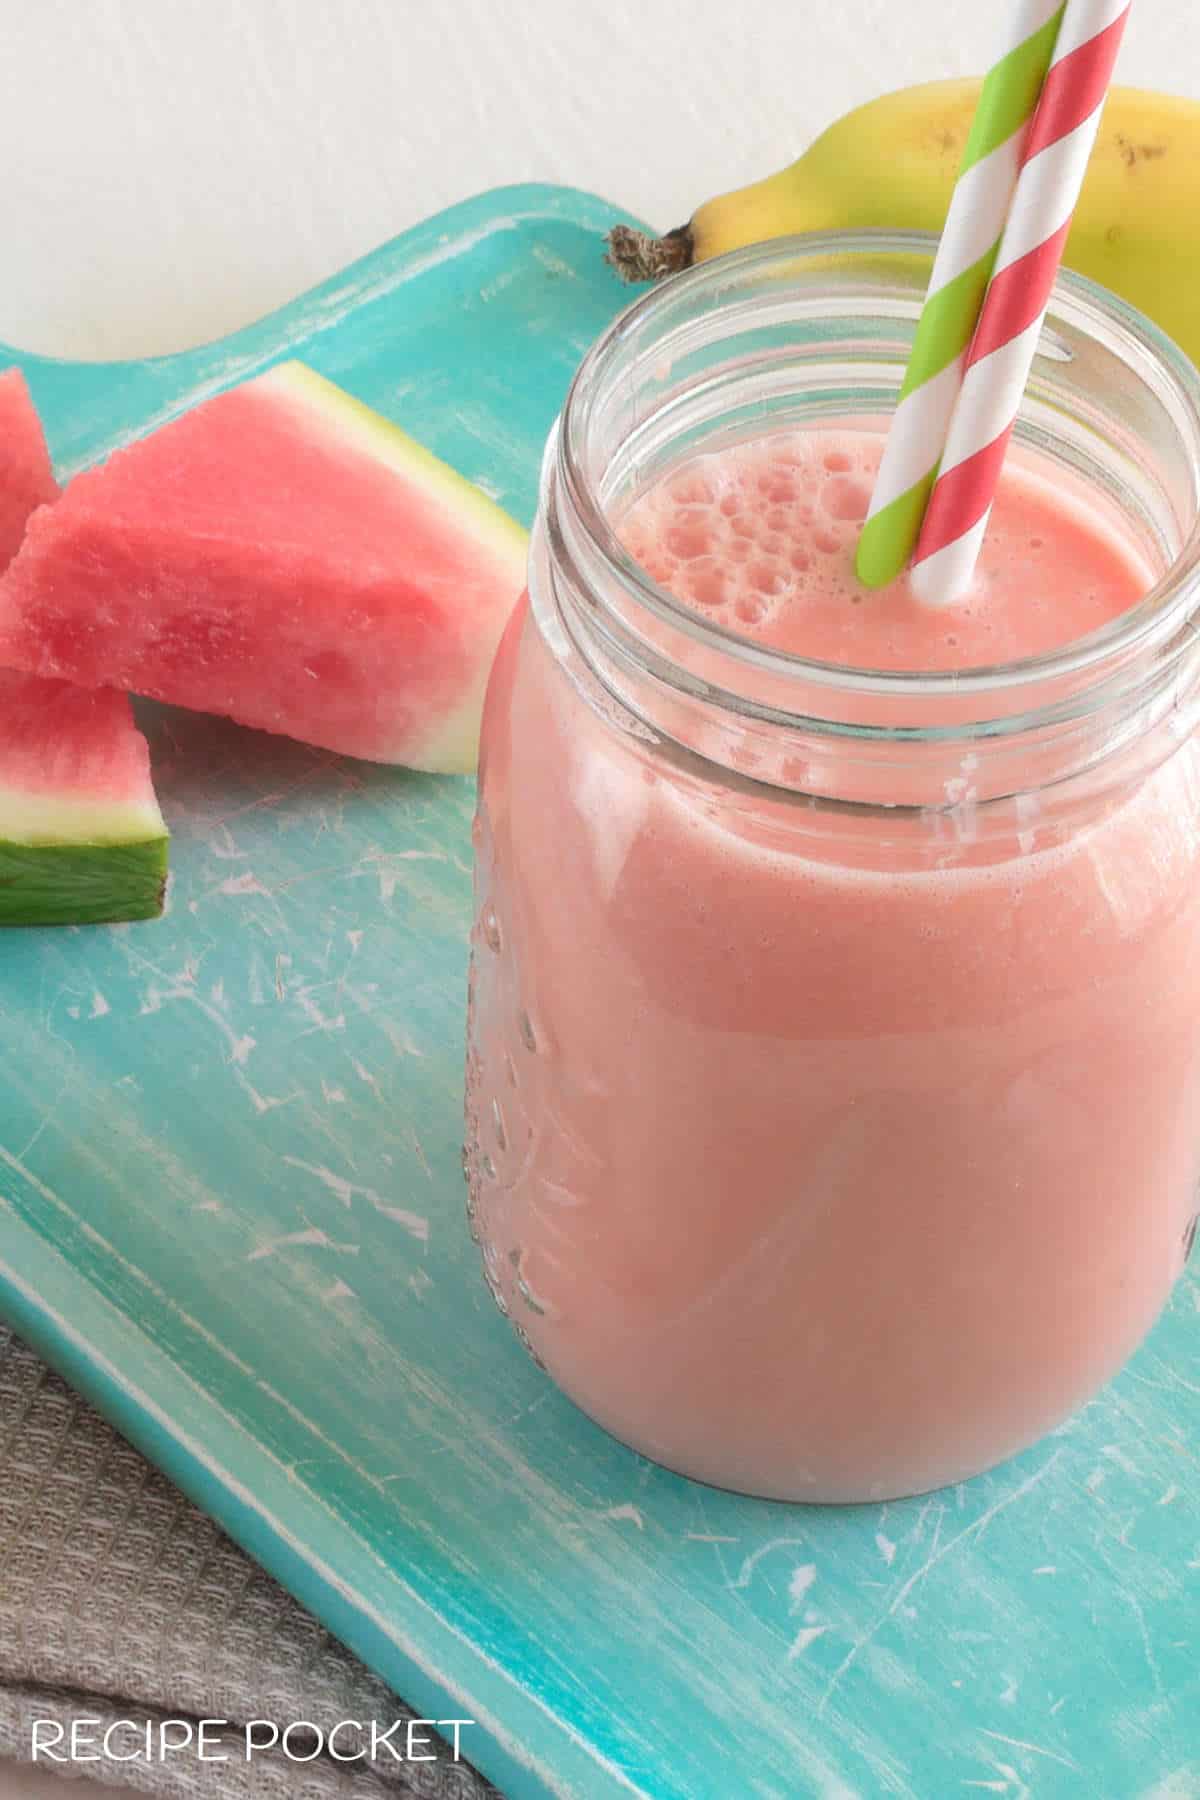 A watermelon smooth in a glass bottle with two drinking straws.